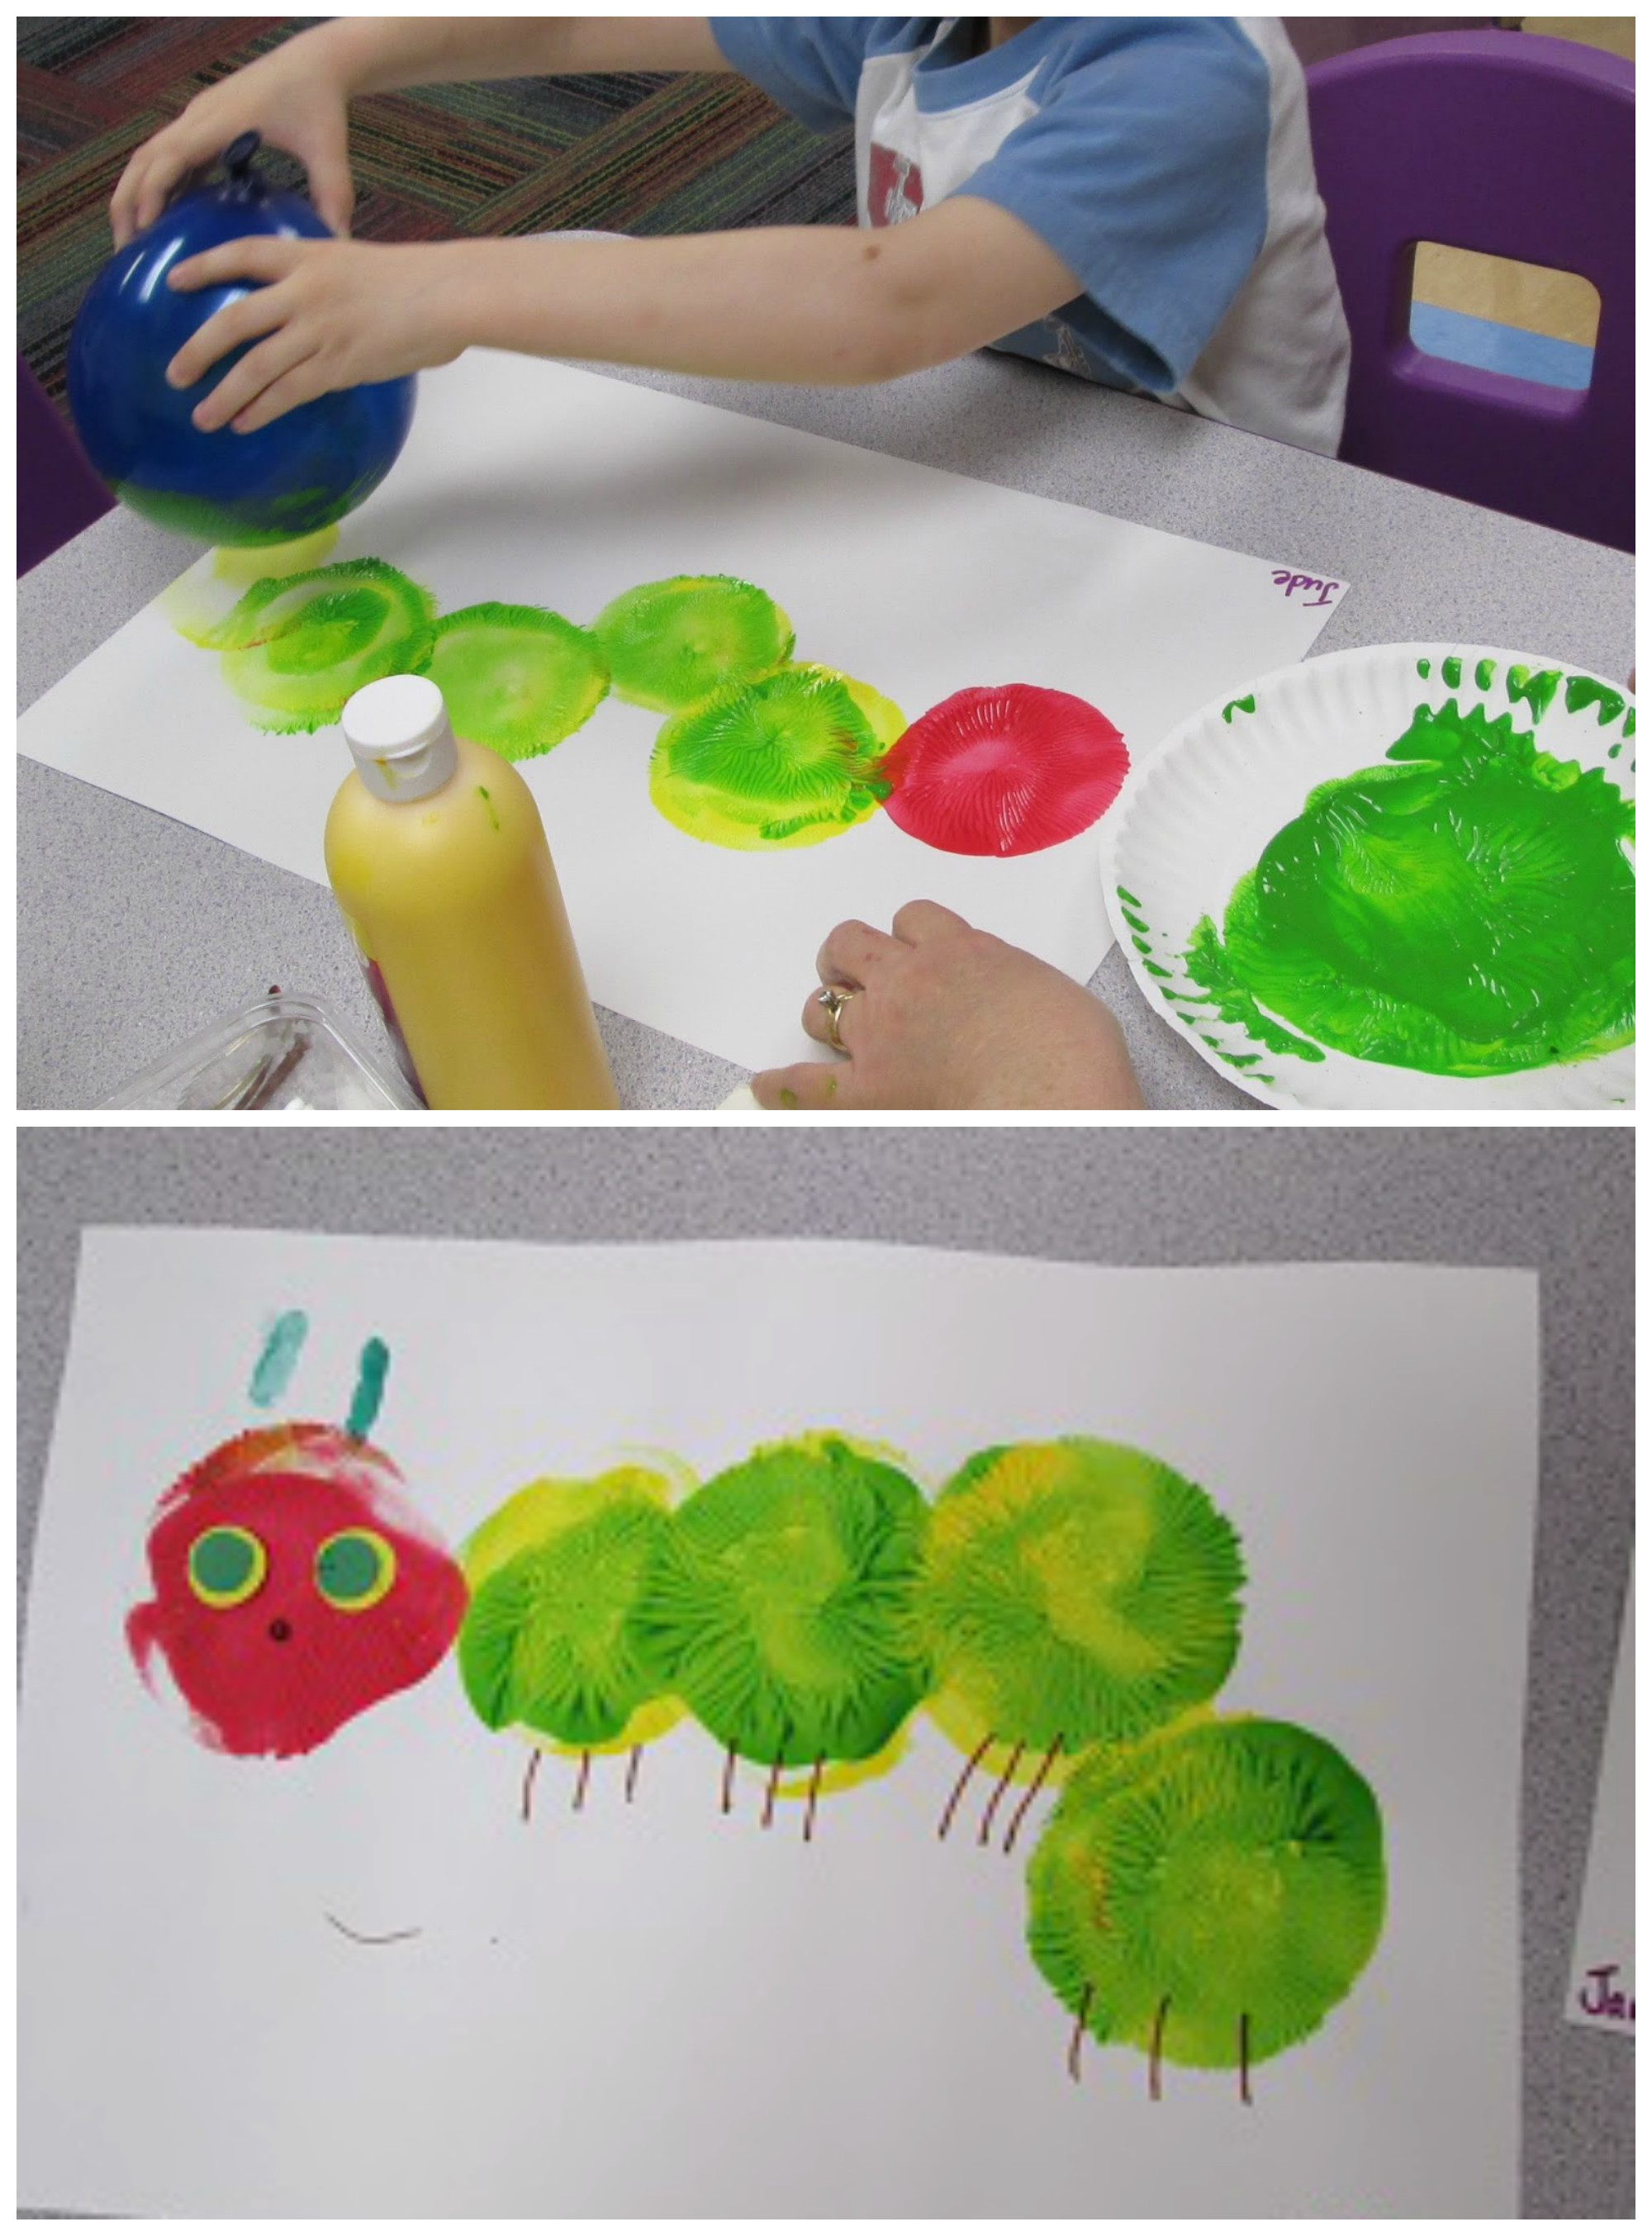 What Are Some Inspirational Sources For Preschool Craft Ideas?